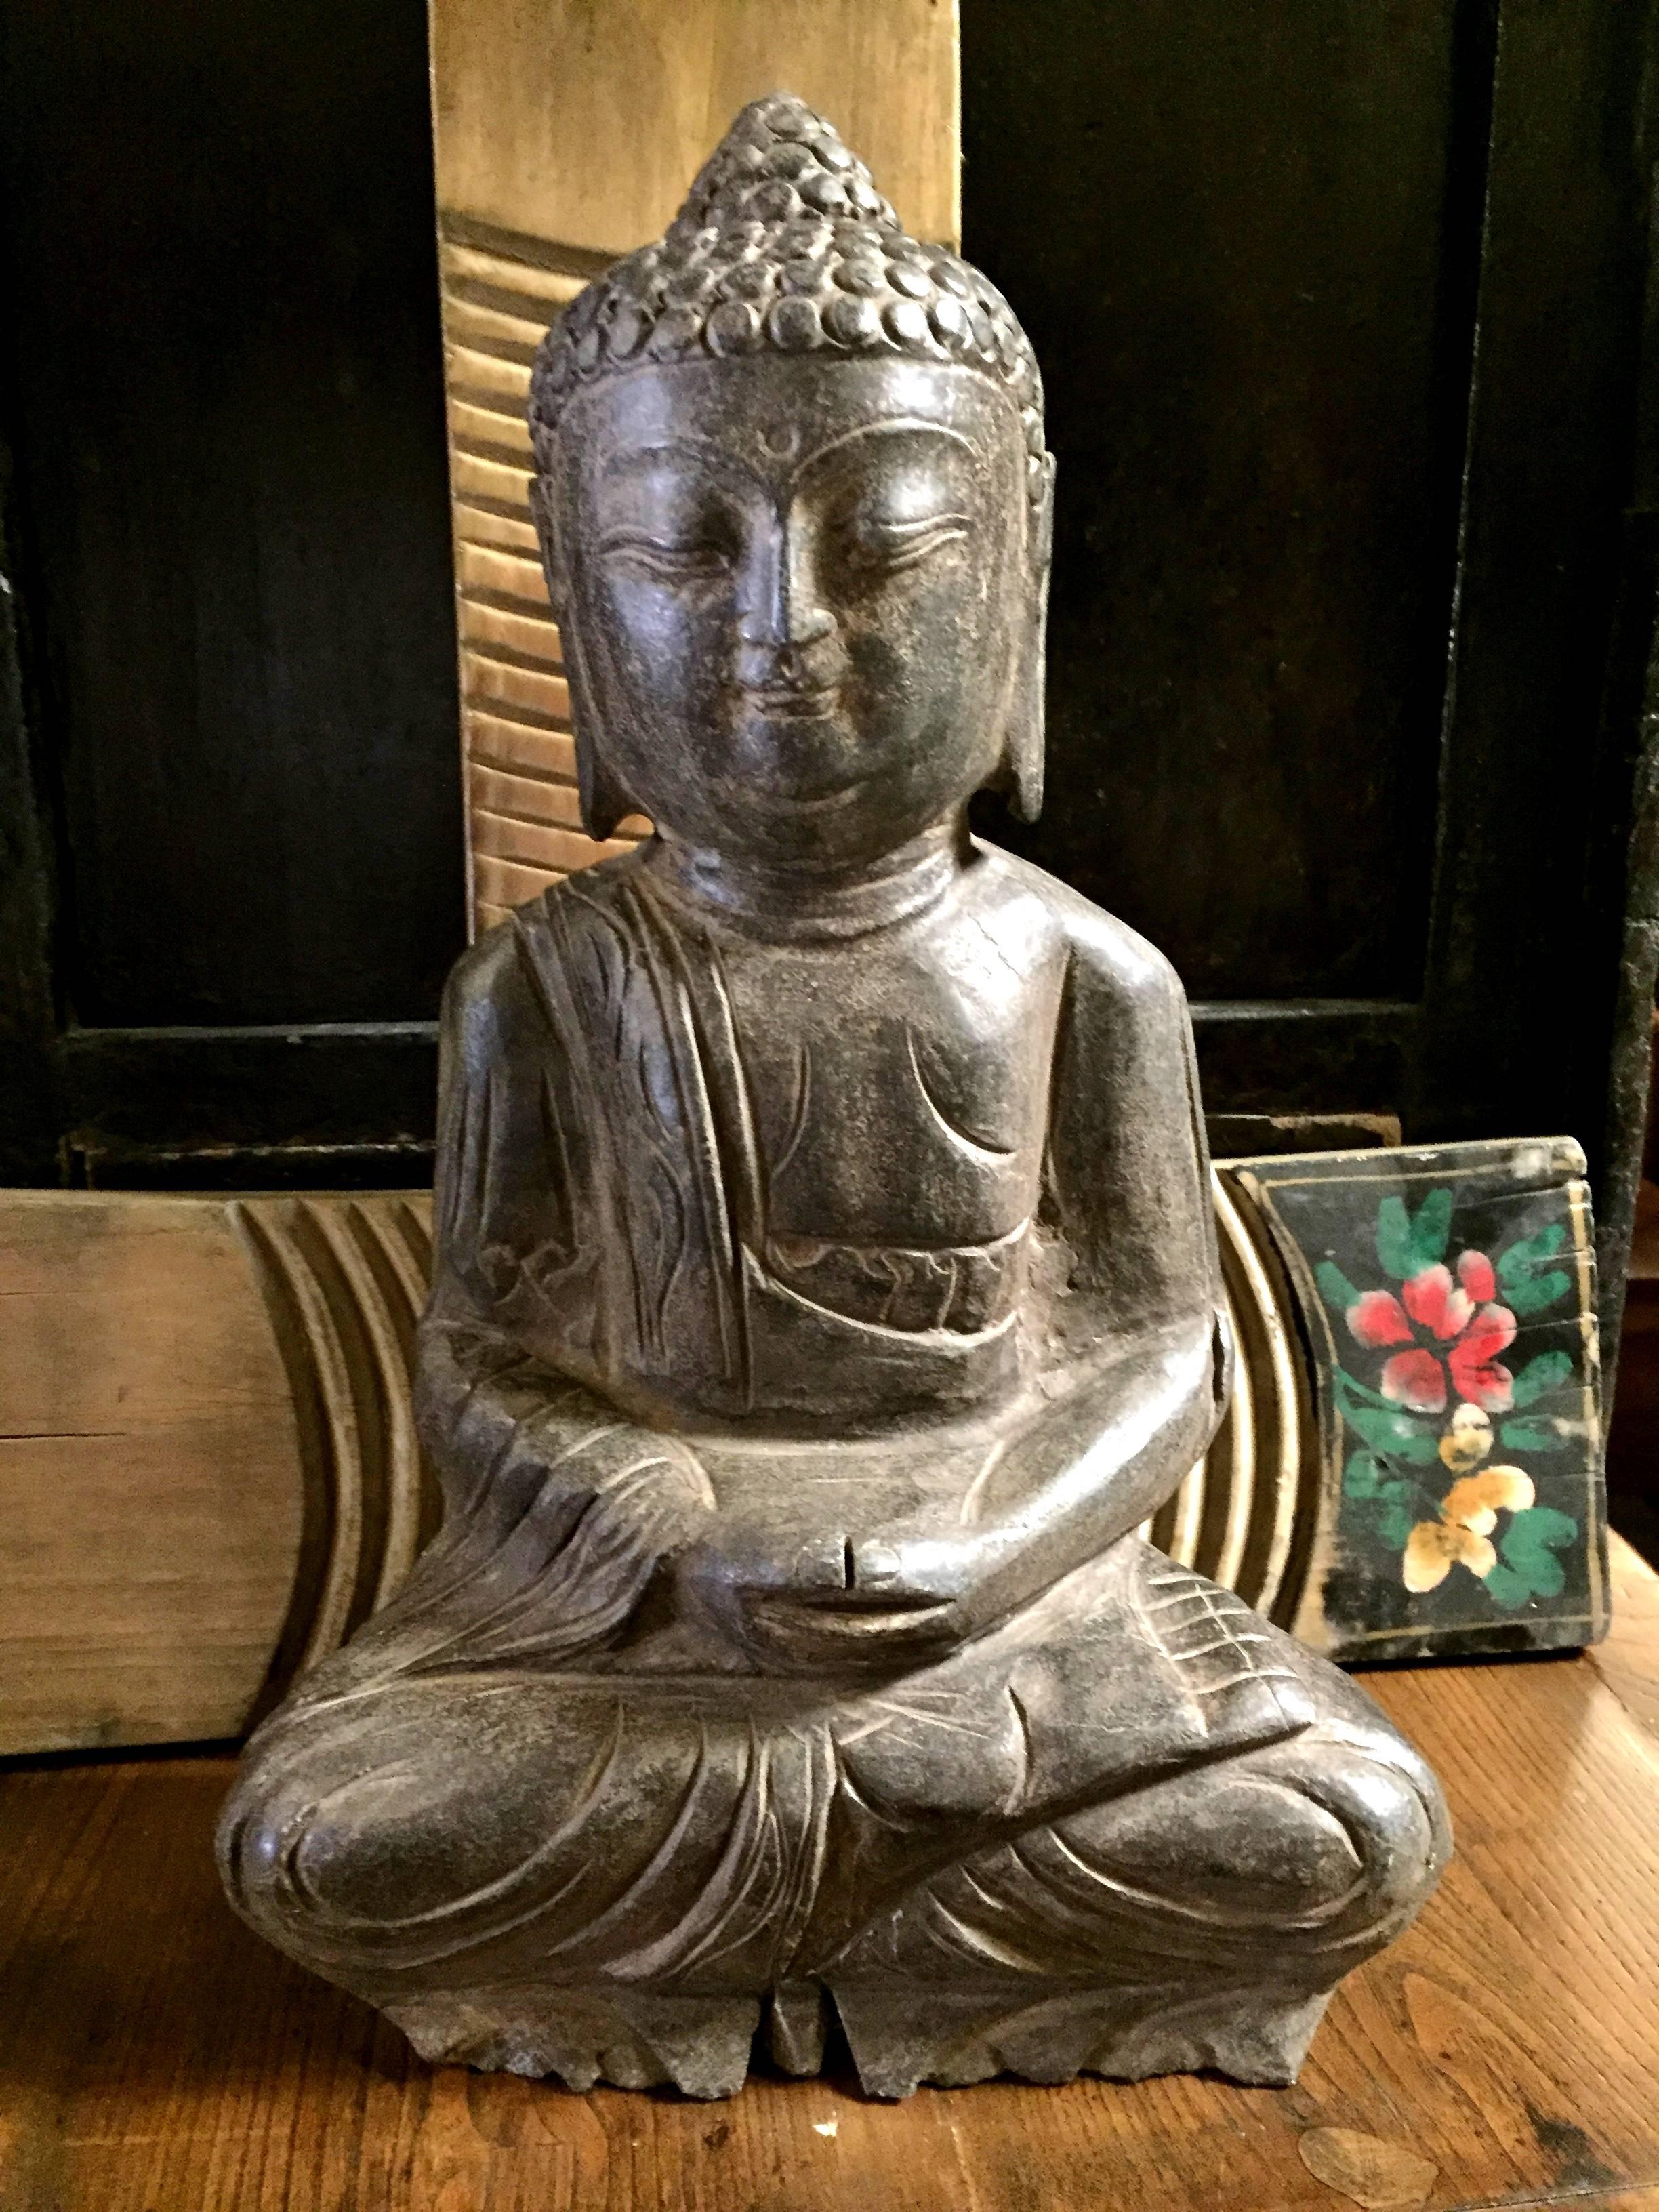 This is a beautiful stone Buddha sculpture. The piece displays fine details of head crown, facial features and robe. Peaceful expressions and overall serenity.

This is a heavy, substantial, solid stone, handcrafted piece. Perfect for indoor or